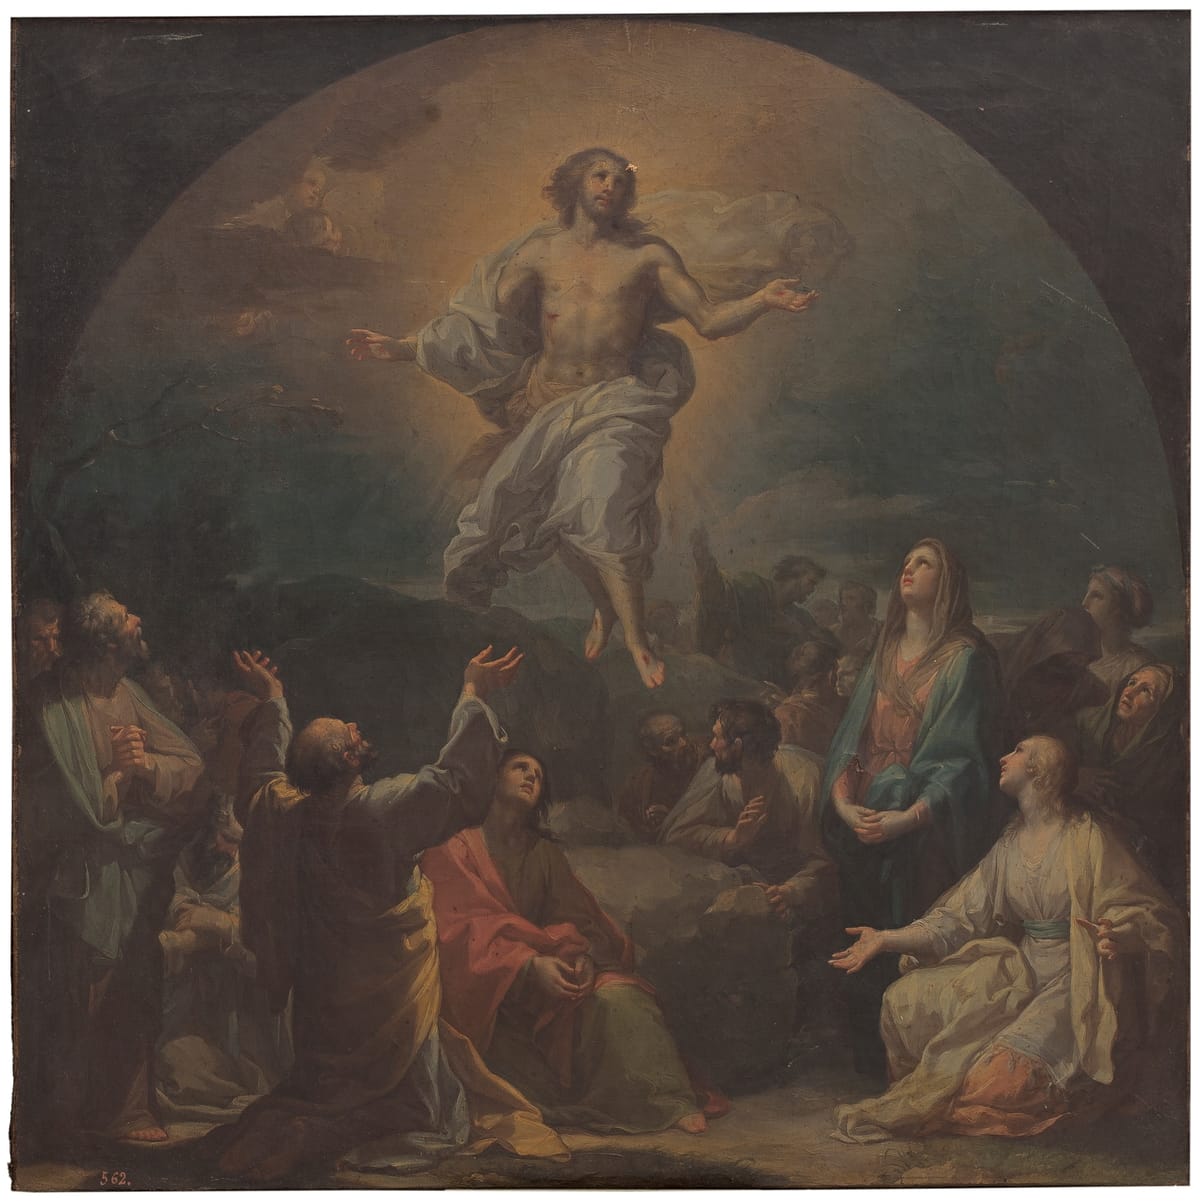 The Ascension of the Lord (1769) by Francisco Bayeu - Public Domain Catholic Painting